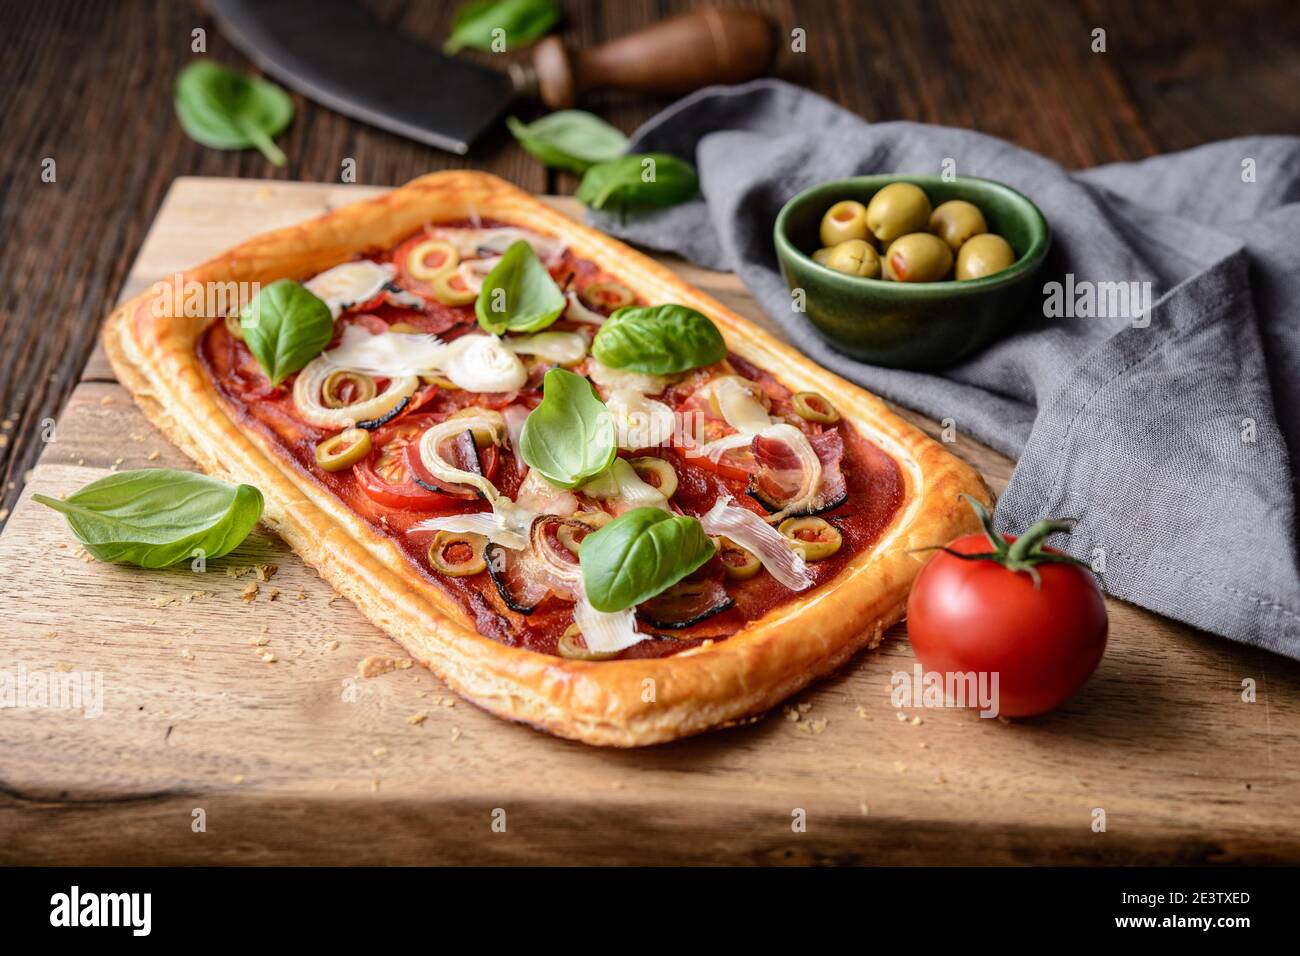 Homemade puff pastry pizza with bacon slices, tomatoes, green olives, cheese and onion, topped with basil leaves on rustic wooden background Stock Photo